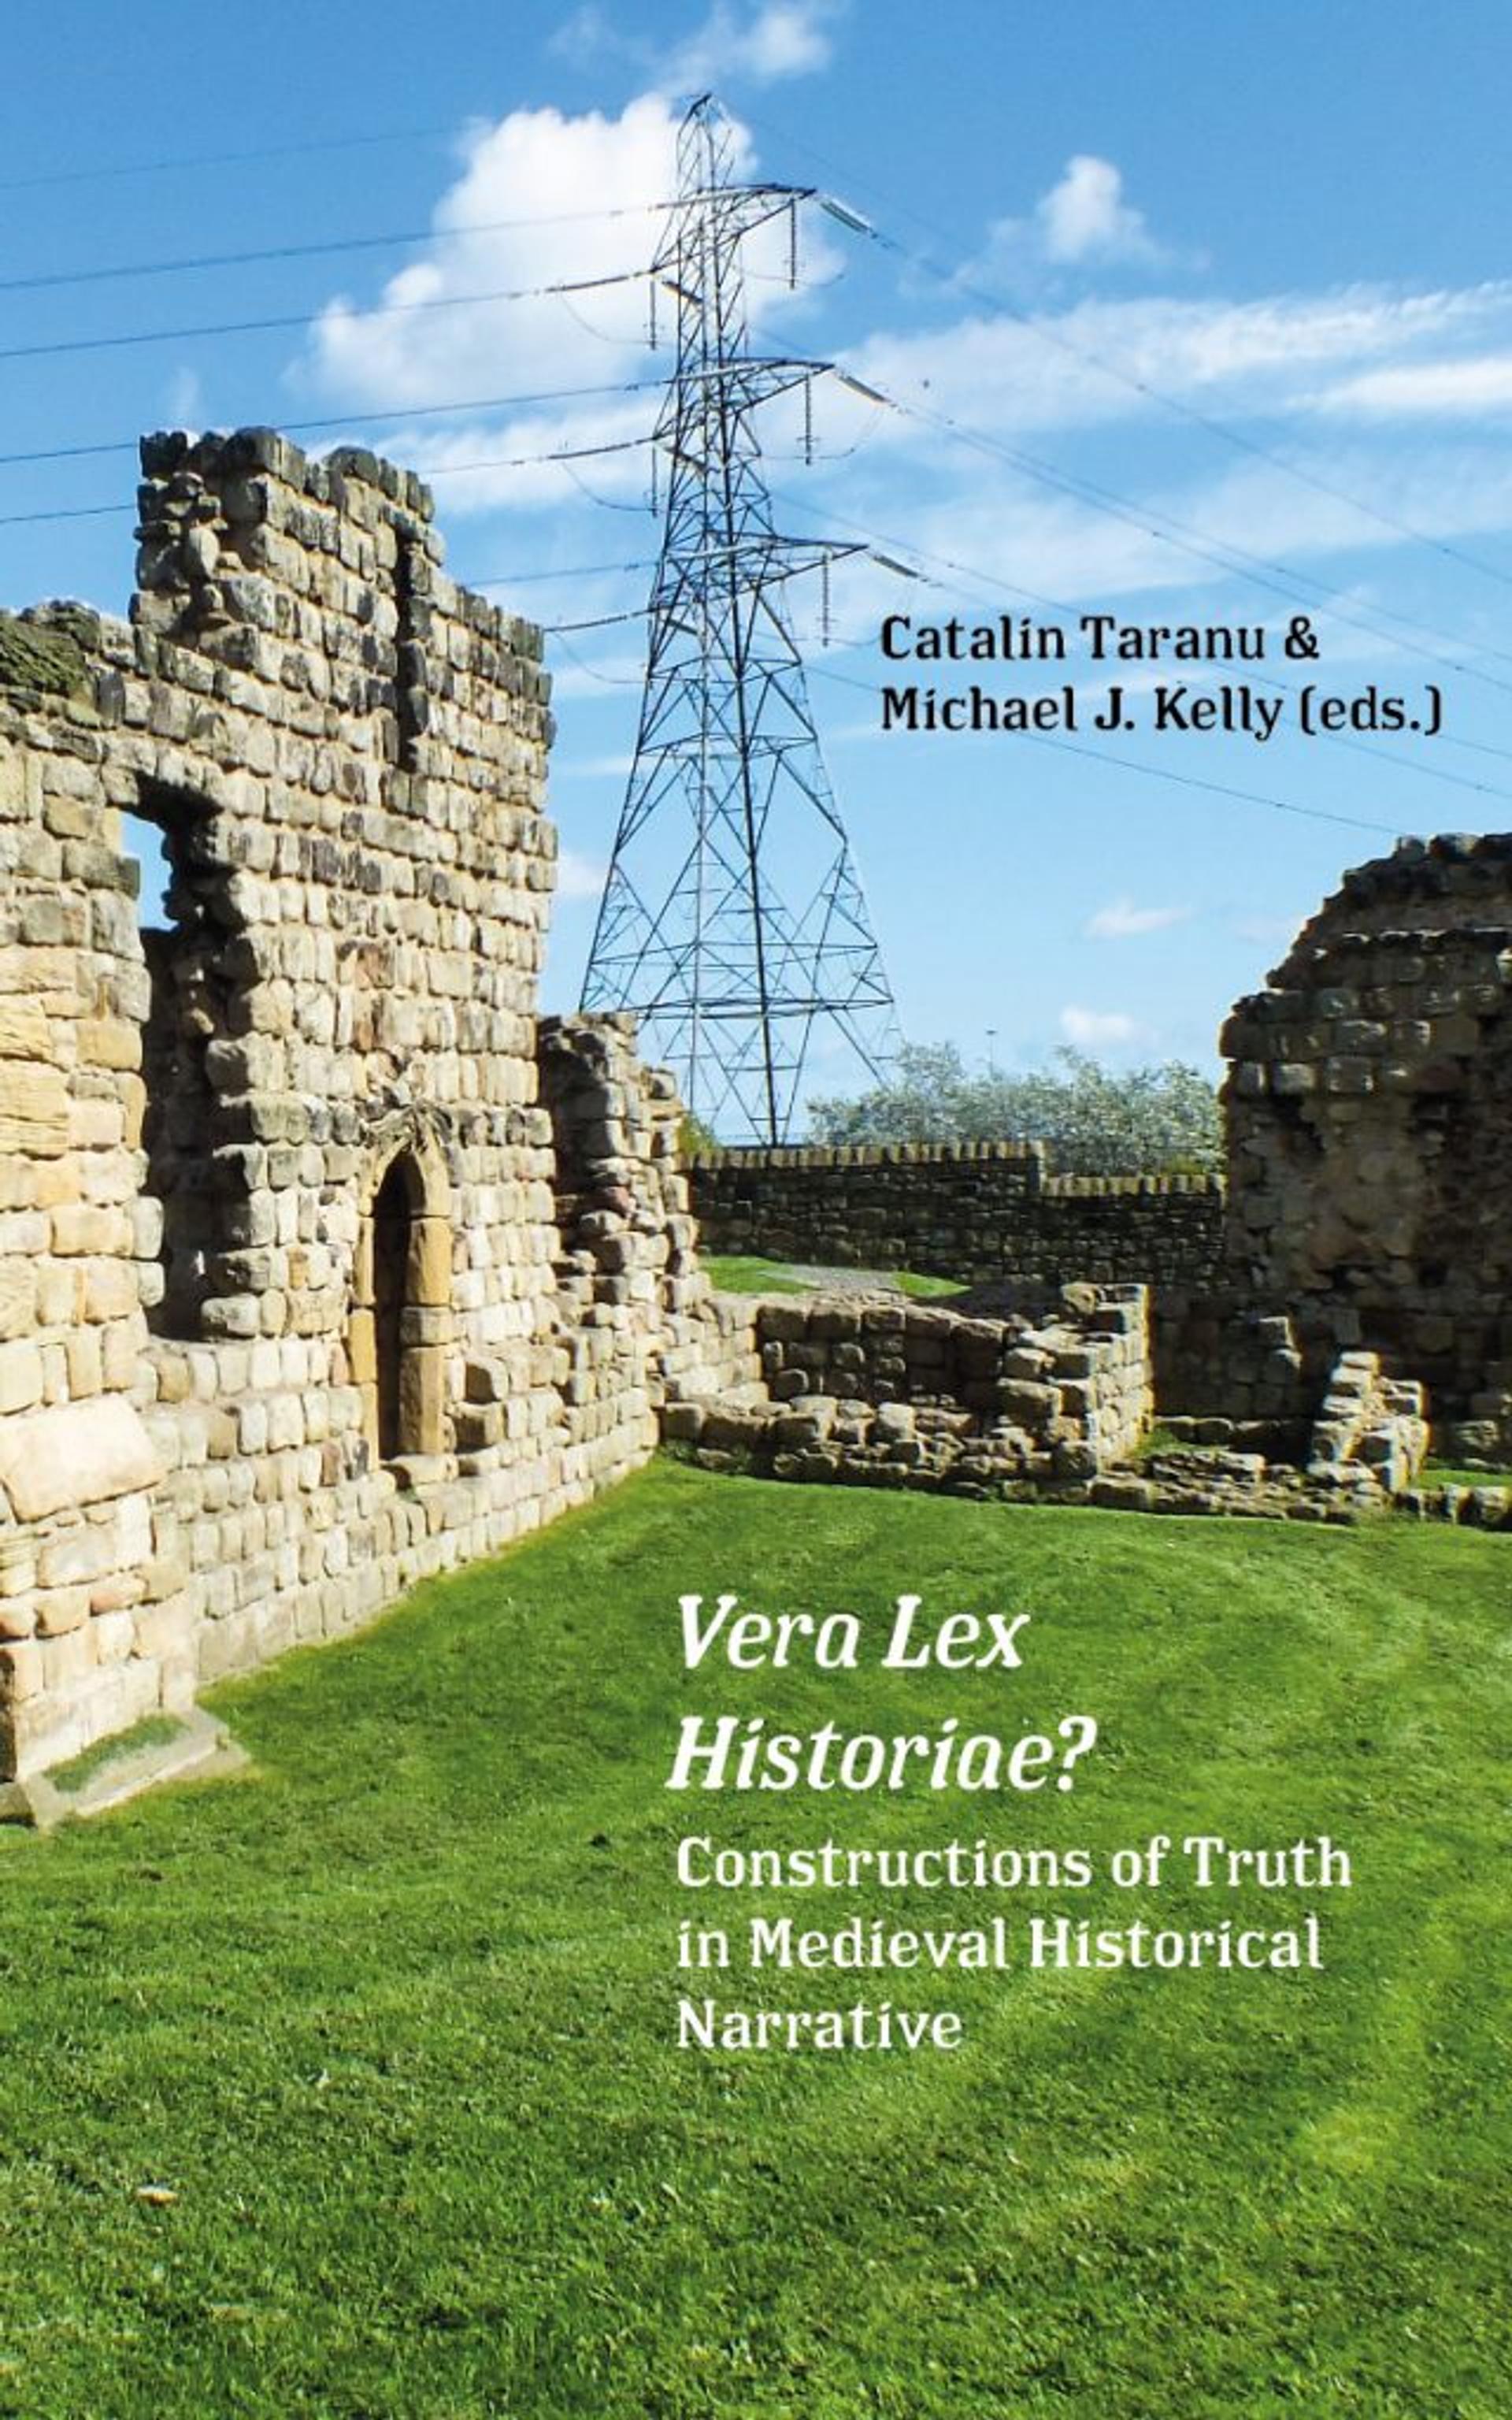 Cover of book titled Vera Lex Historiae? Constructions of Truth in Medieval Historical Narrative